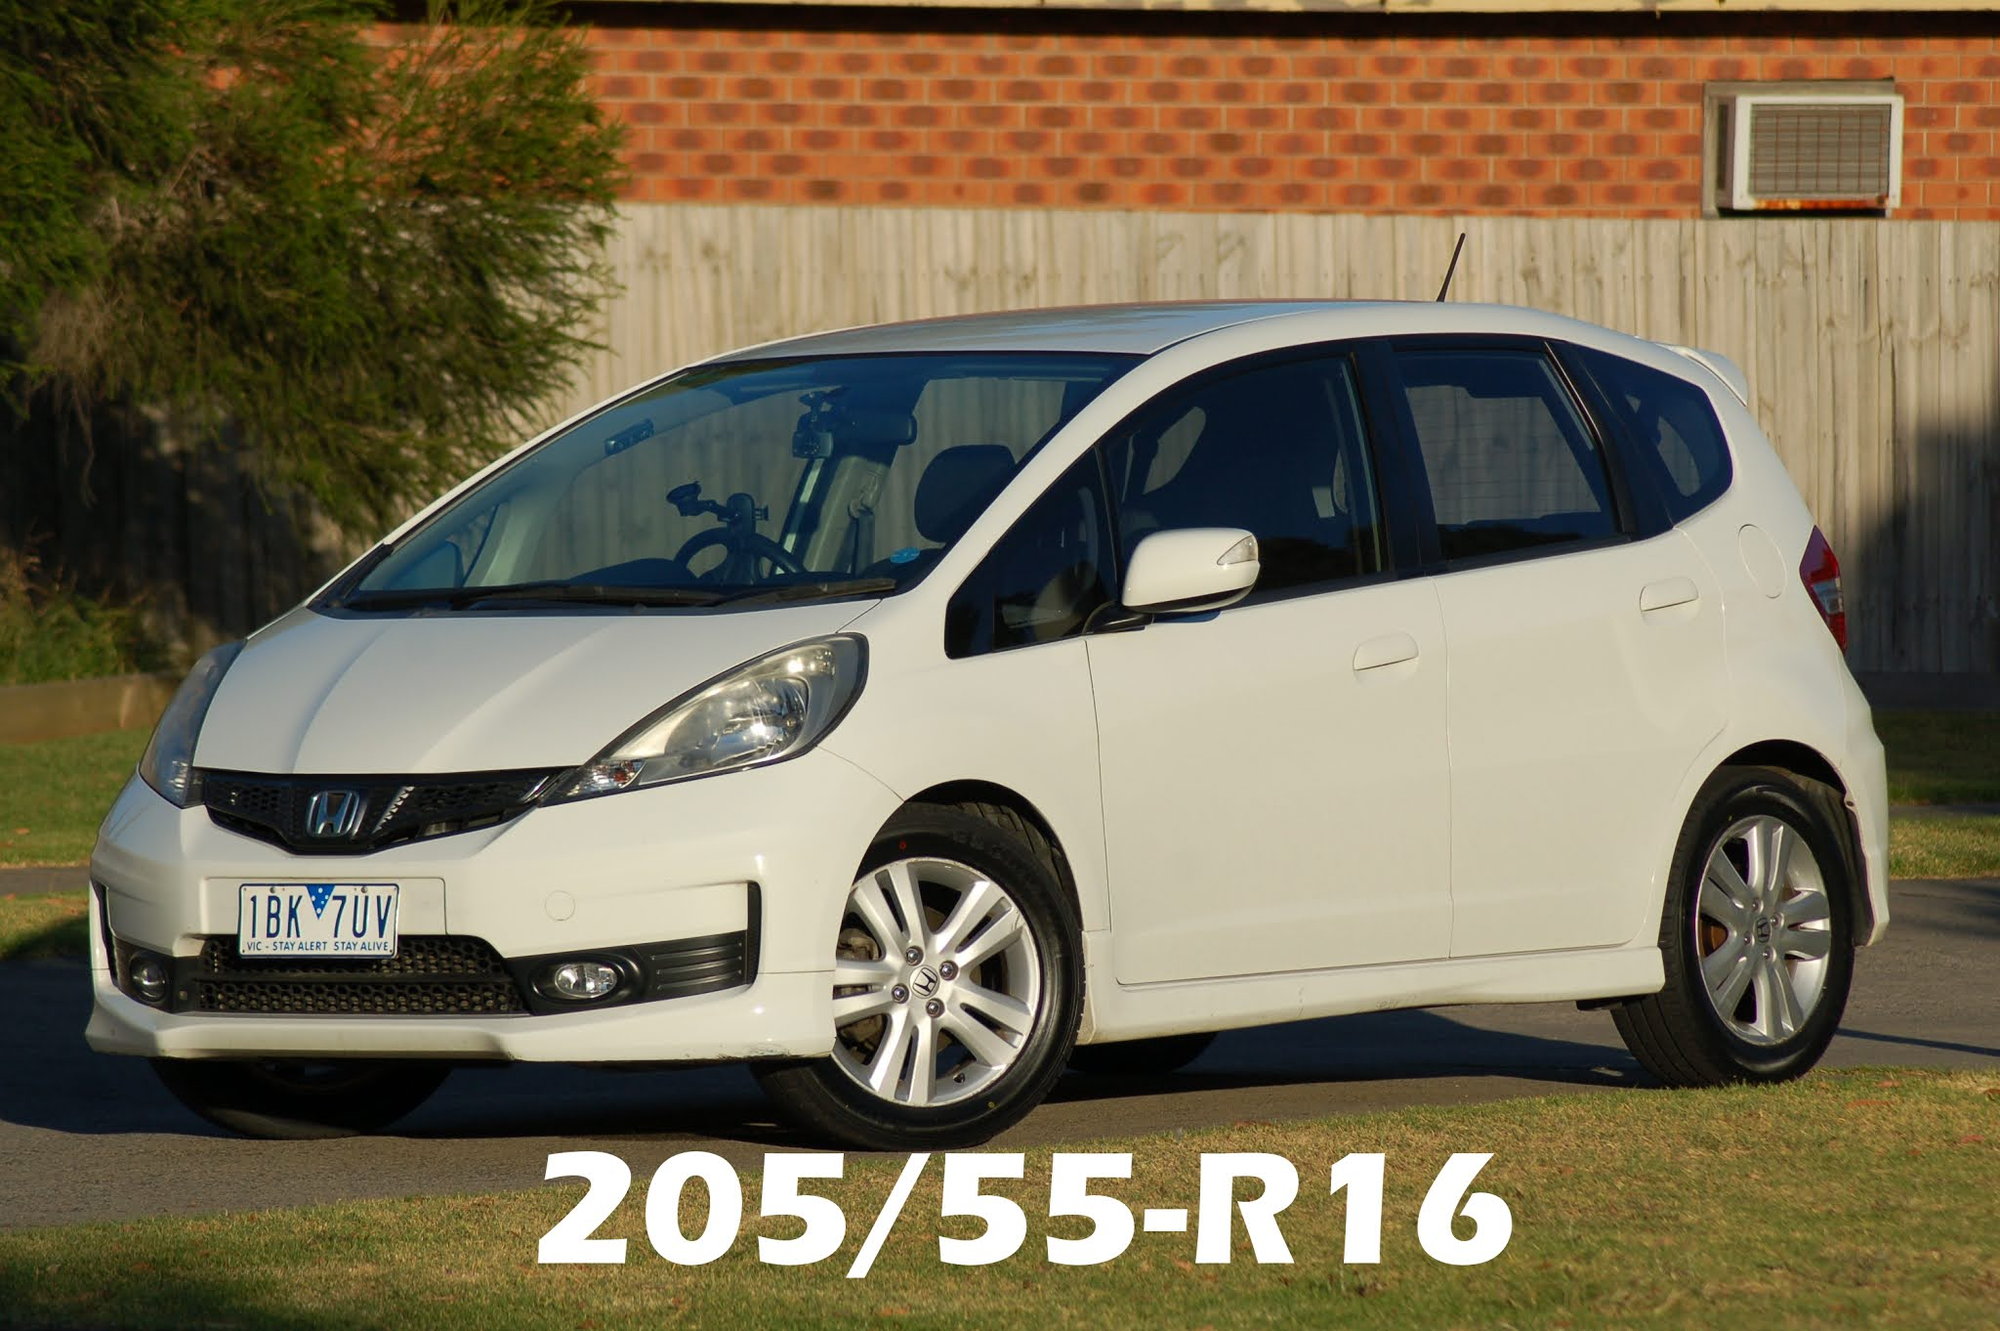 YES!!! 205/55R16 tyres are GREAT - Unofficial Honda FIT Forums